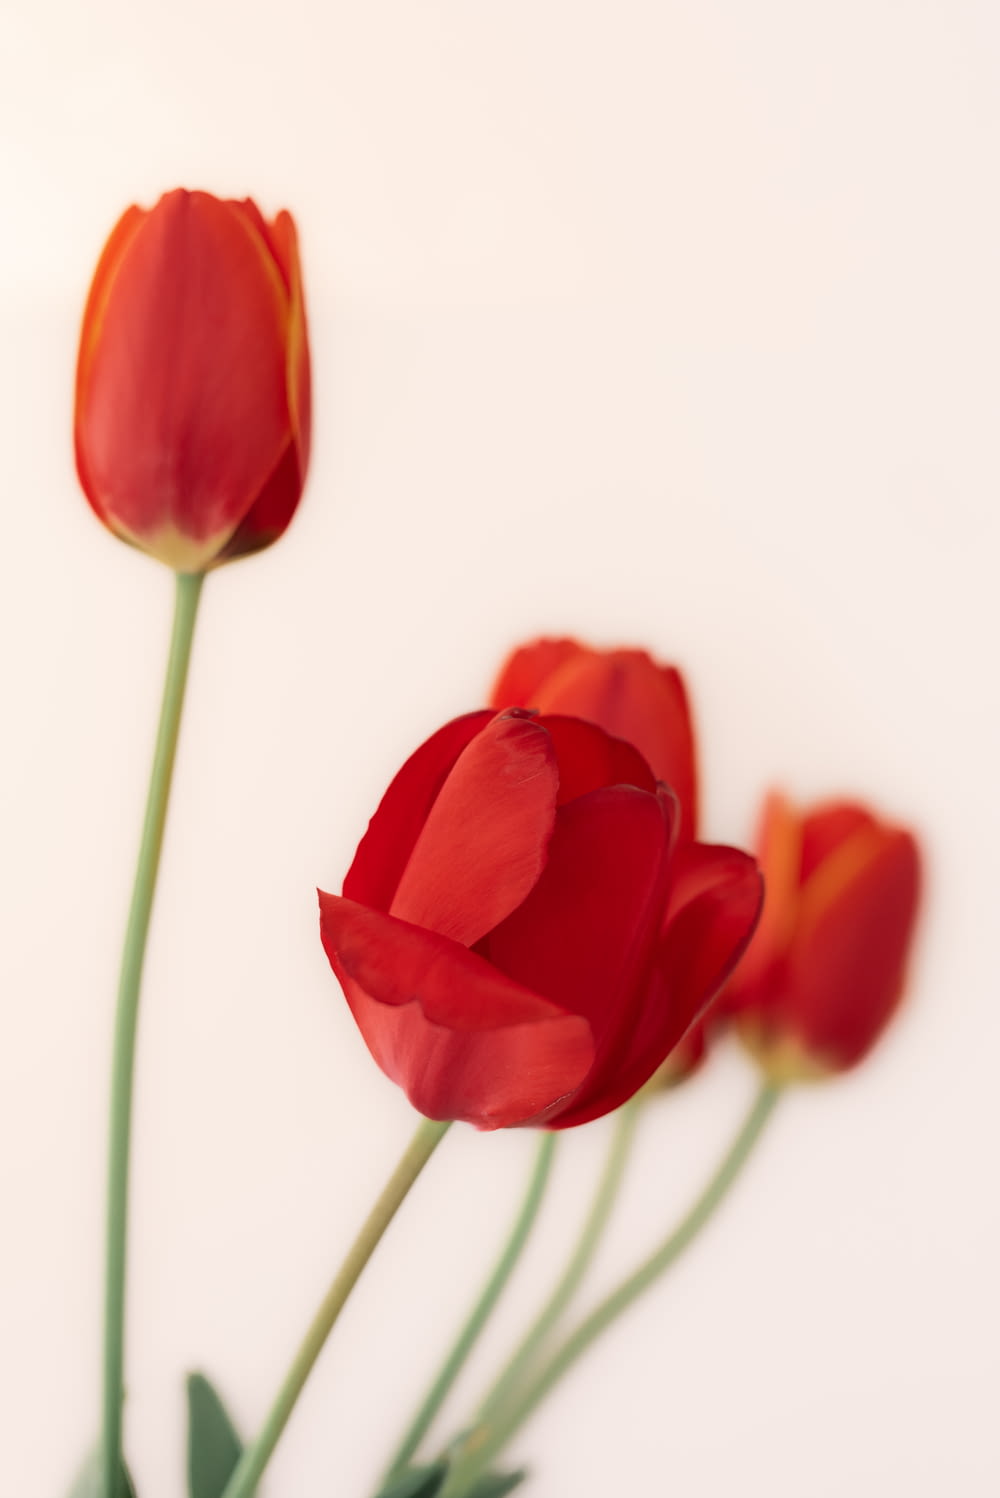 three red tulips in a vase on a white background